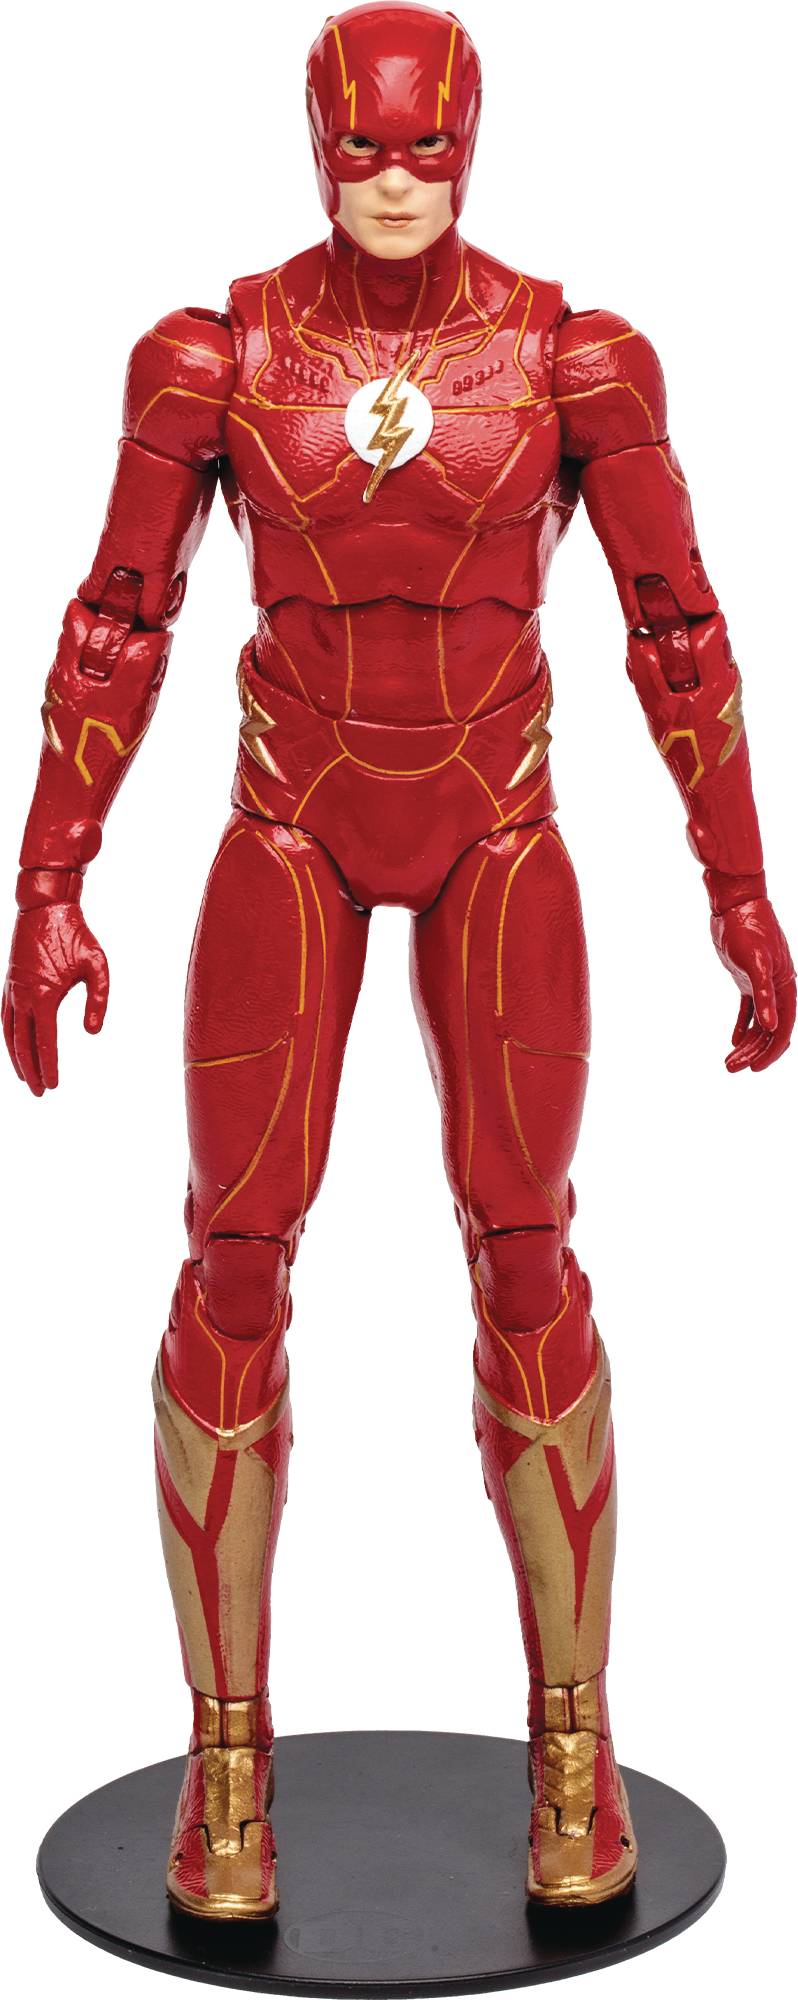 Dc Flash Movie Speed Force Flash 7" Action Figure